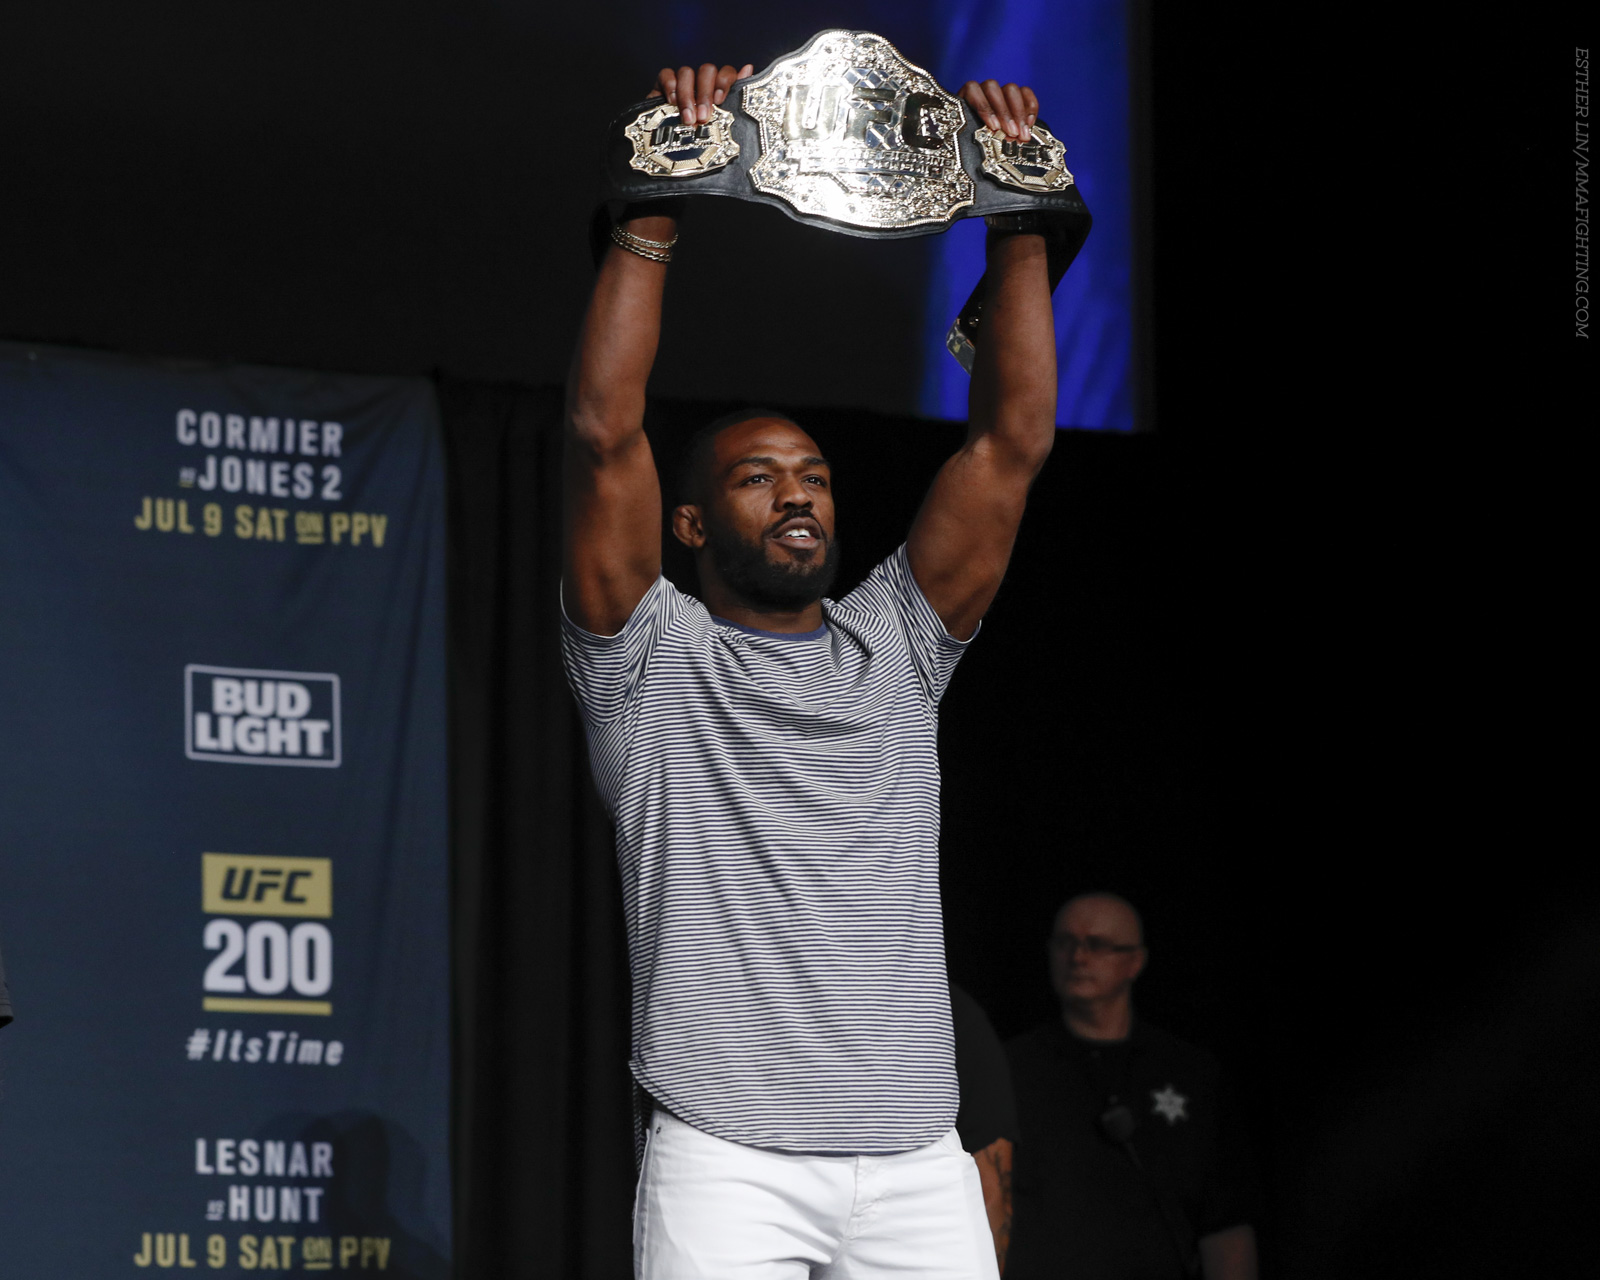 Jon Jones poses with his belt at the UFC 200 press conference Wednesday.